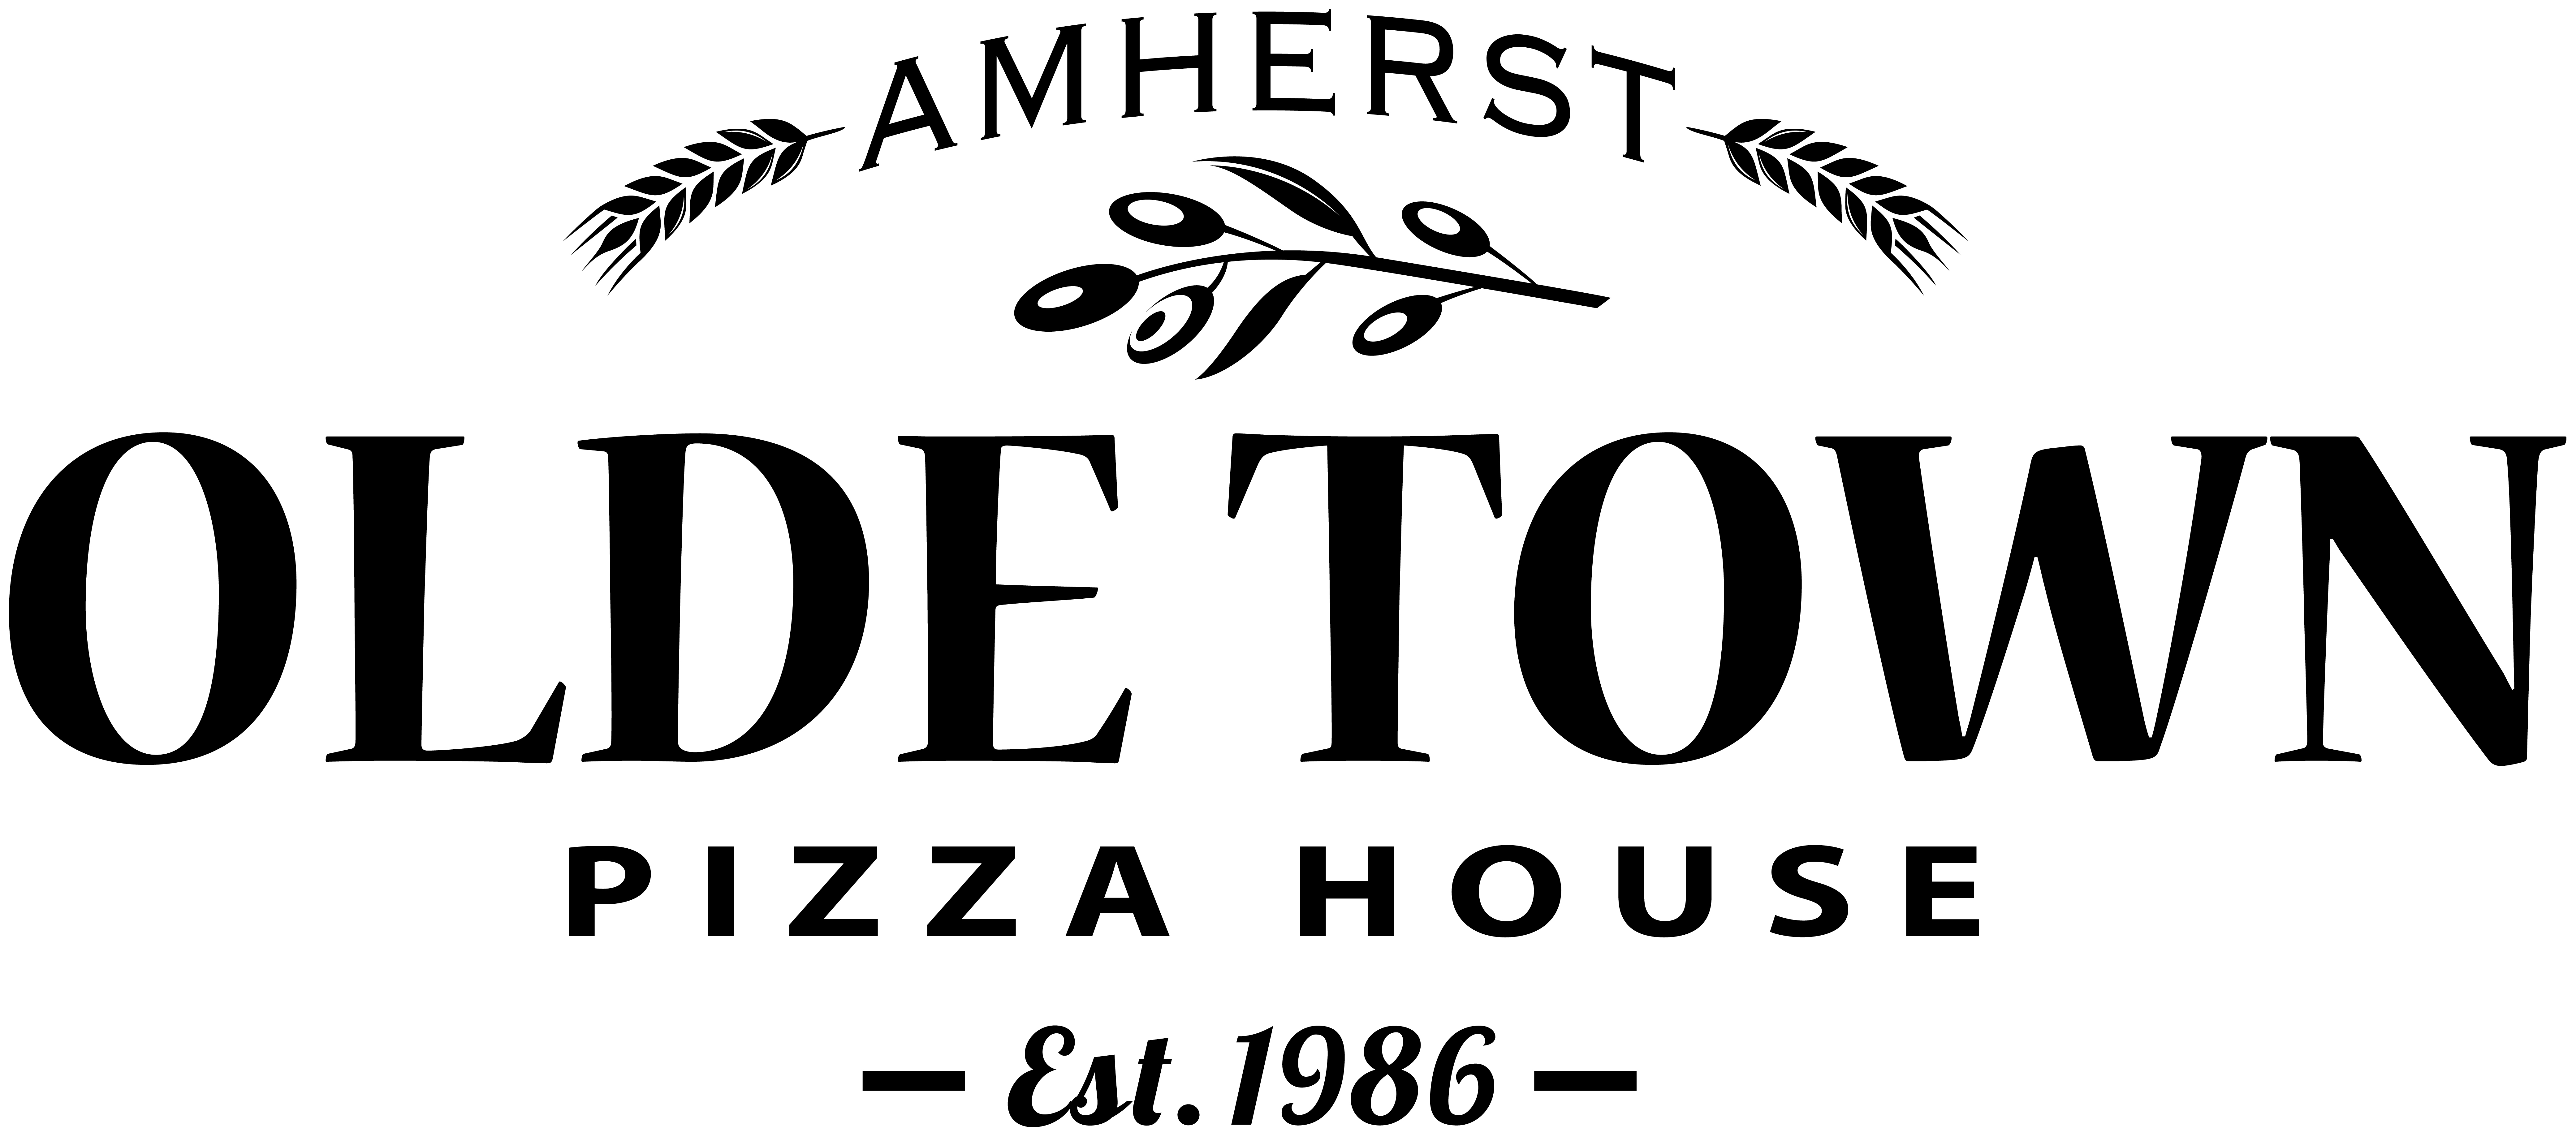 Olde Town Pizza House